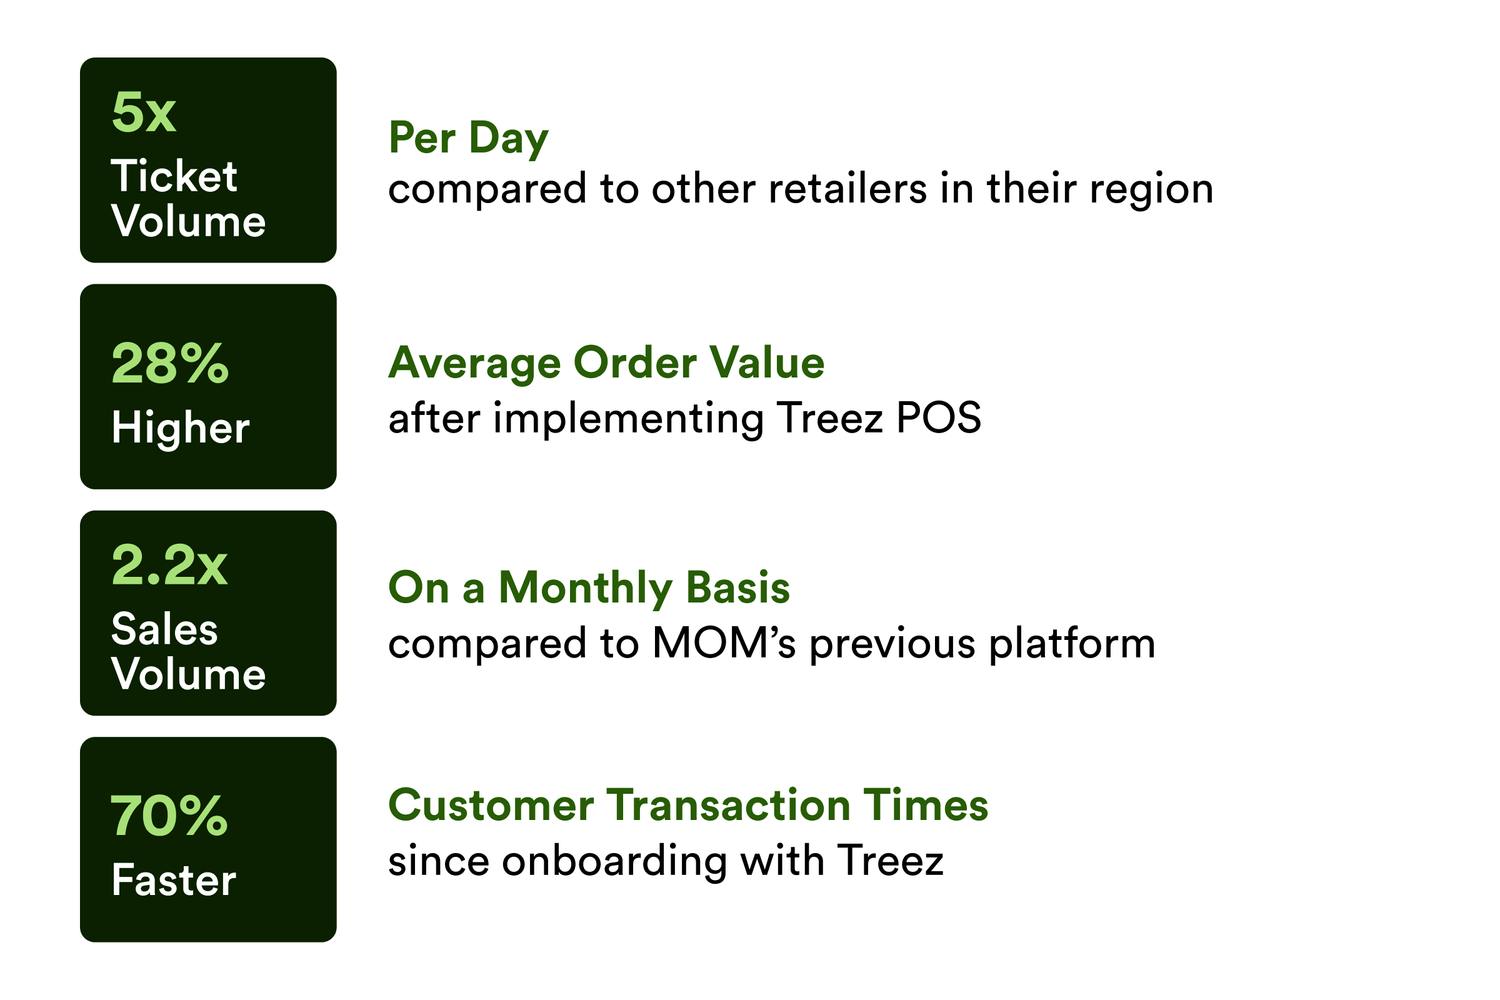 A graphic depicts the improvement to a cannabis dispensary's business after implementing Treez POS, including high ticket volume per day, sales volume per month, Average Order Value, and faster customer transaction times